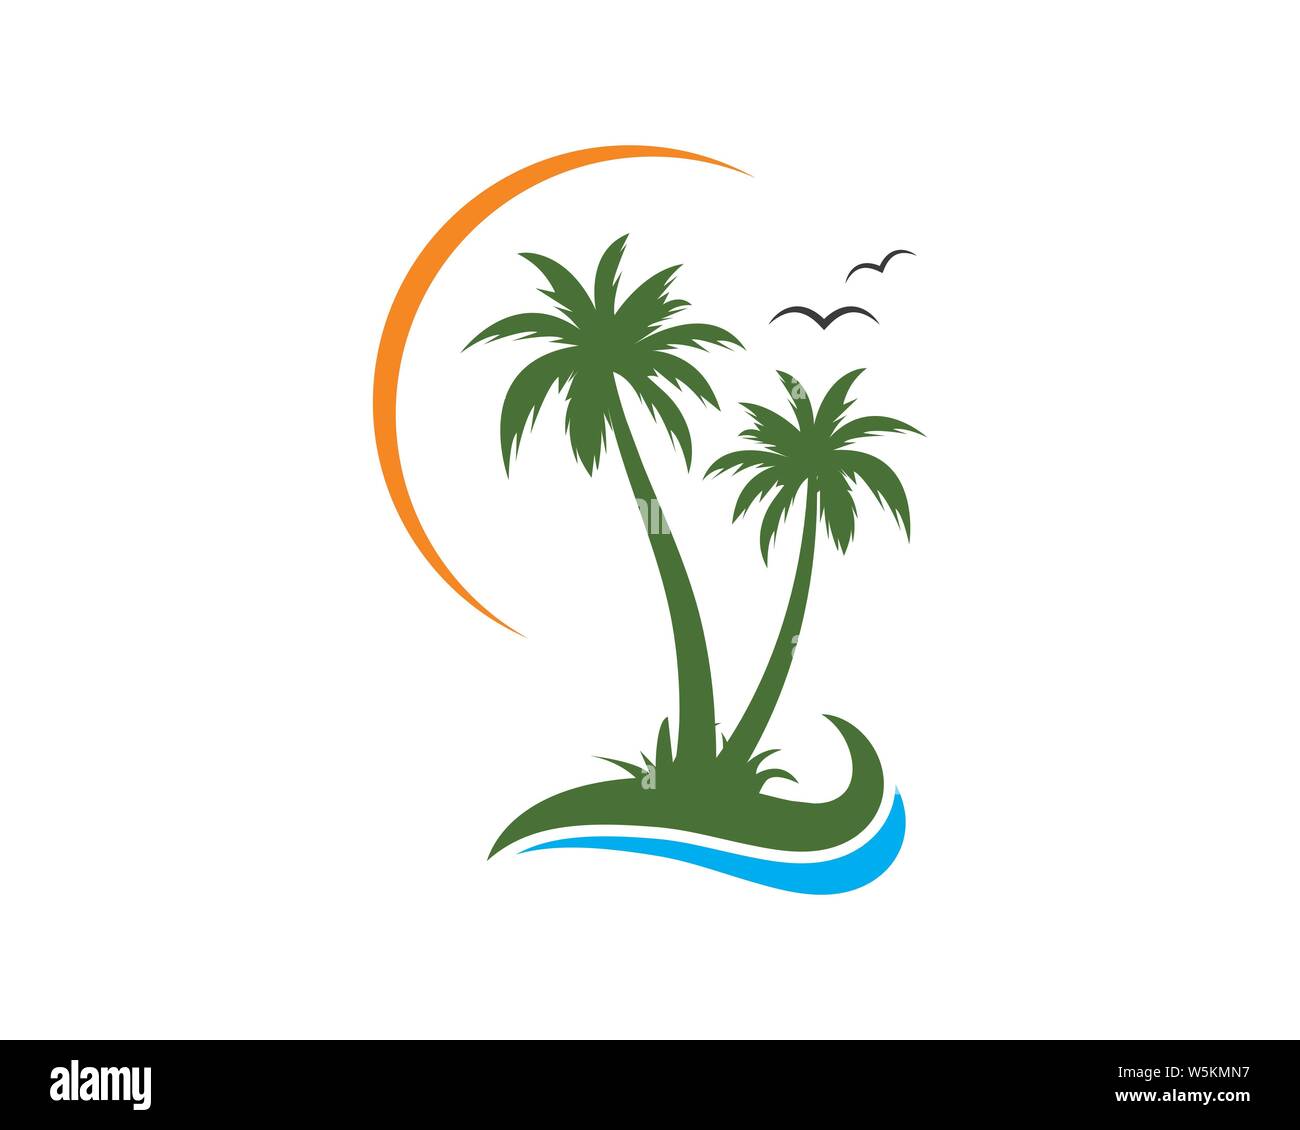 Palm tree icon of summer and travel logo vector illustration design Stock Photo